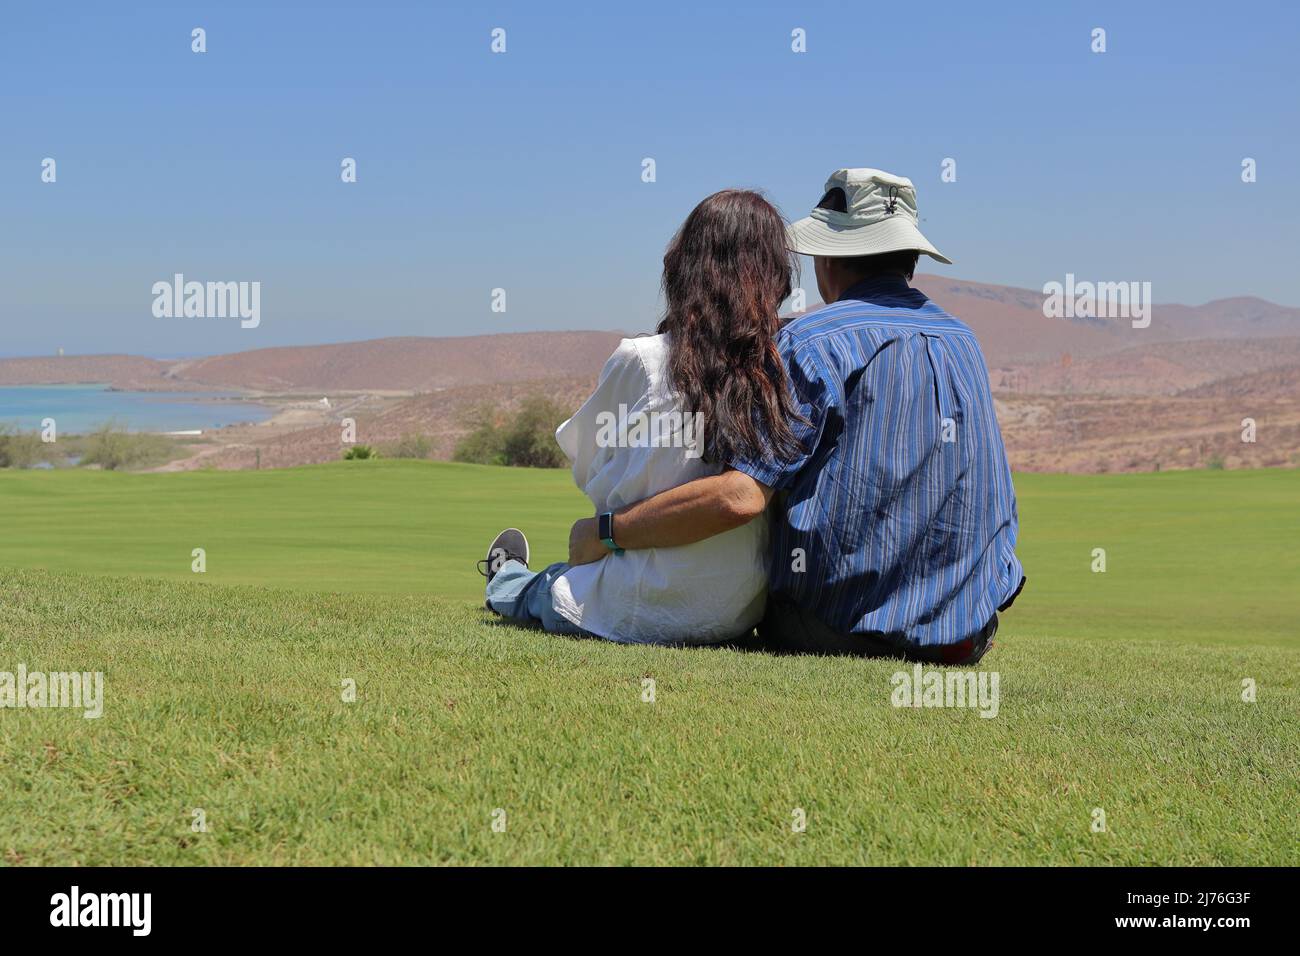 A loving couple sitting in the grass, relaxing while looking at the landscape. Stock Photo